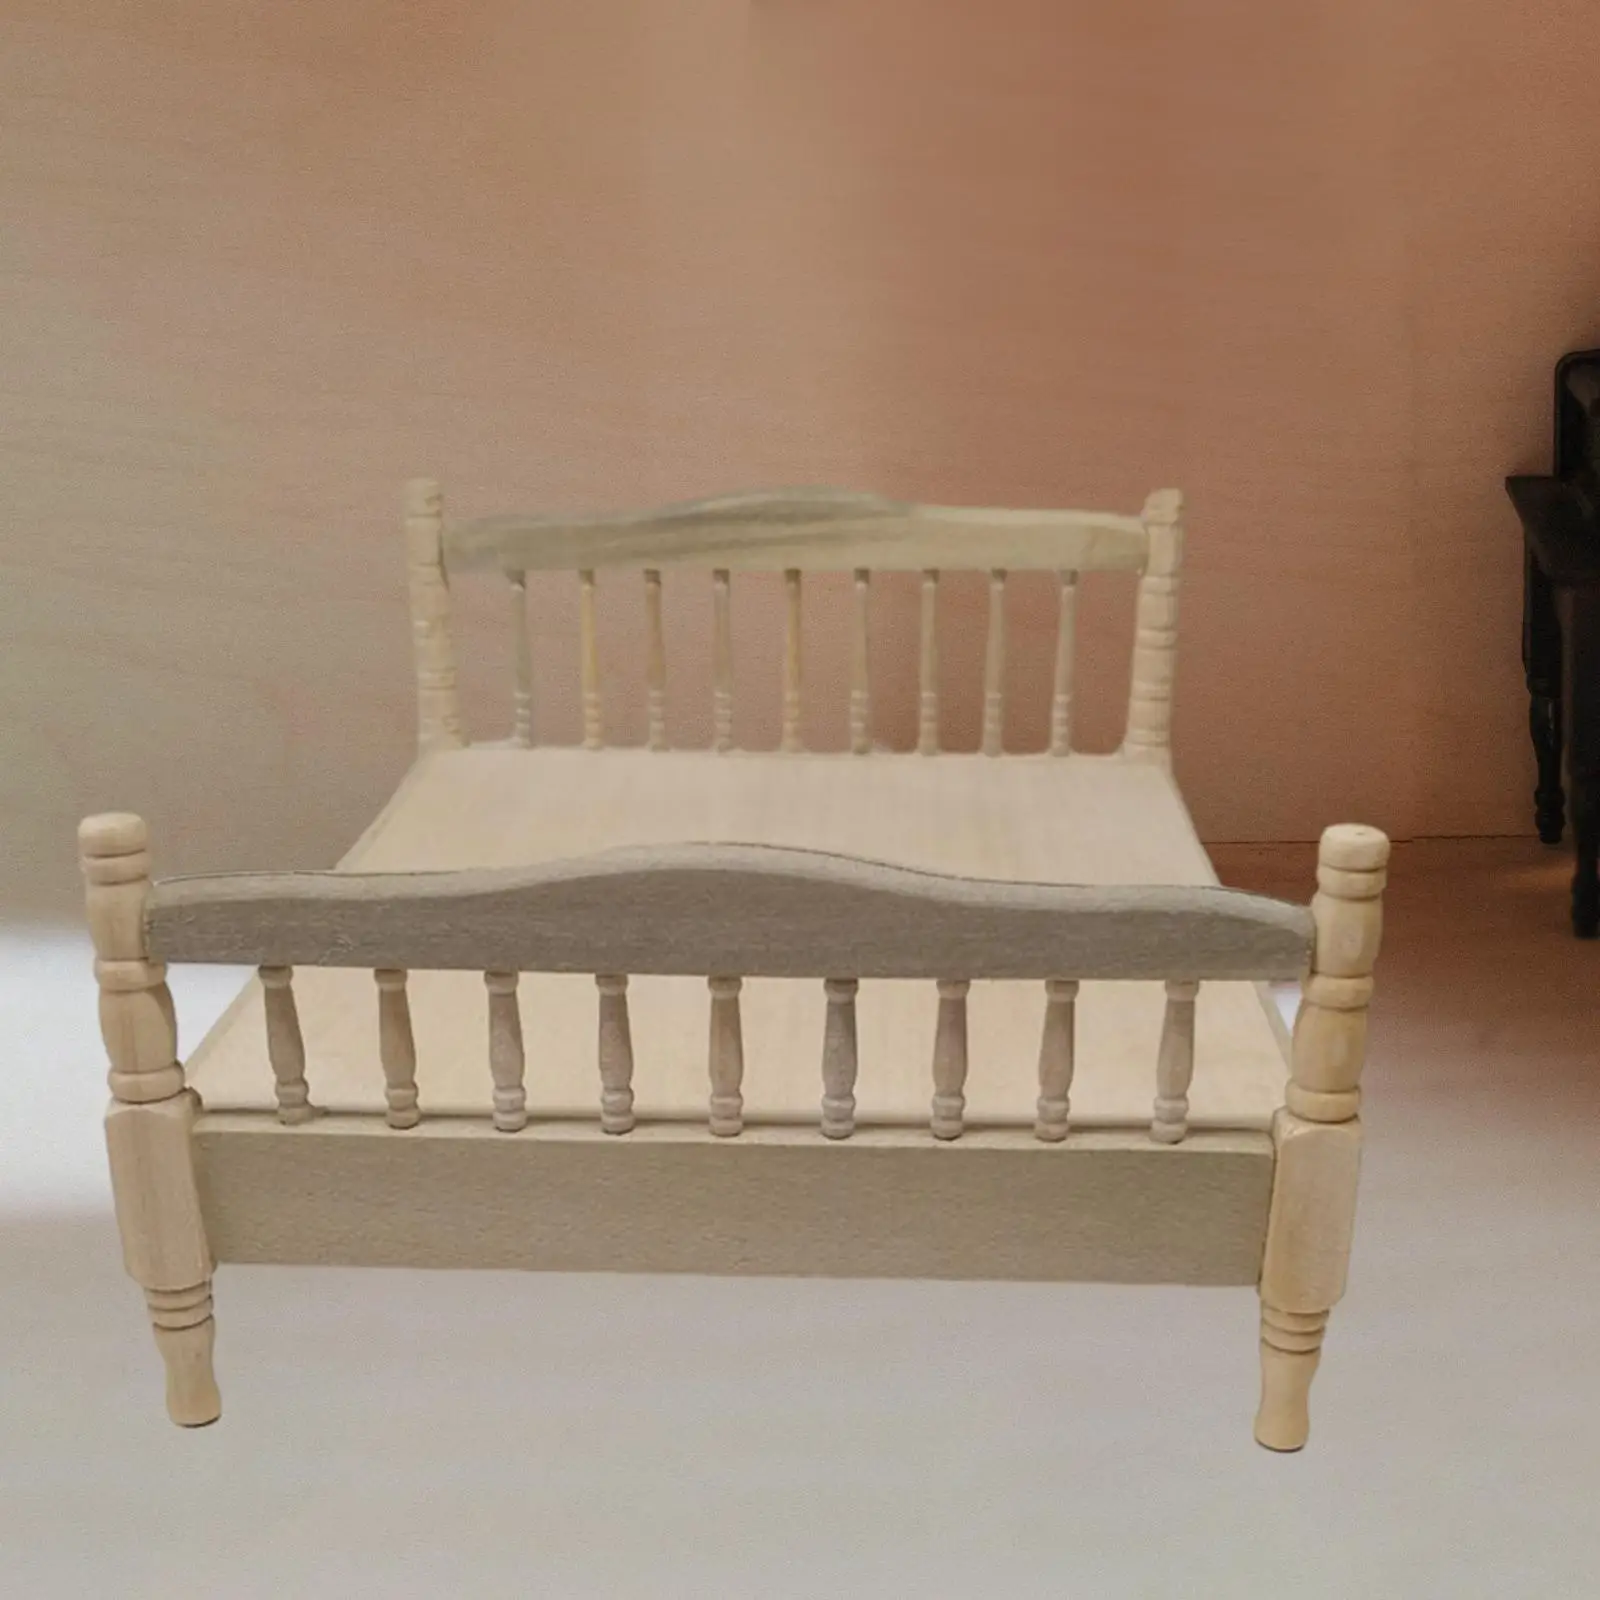 1/12 Dollhouse Bed Collections Realistic Wooden Bed Model for Model Train Miniature Scene Building DIY Projects Micro Landscape